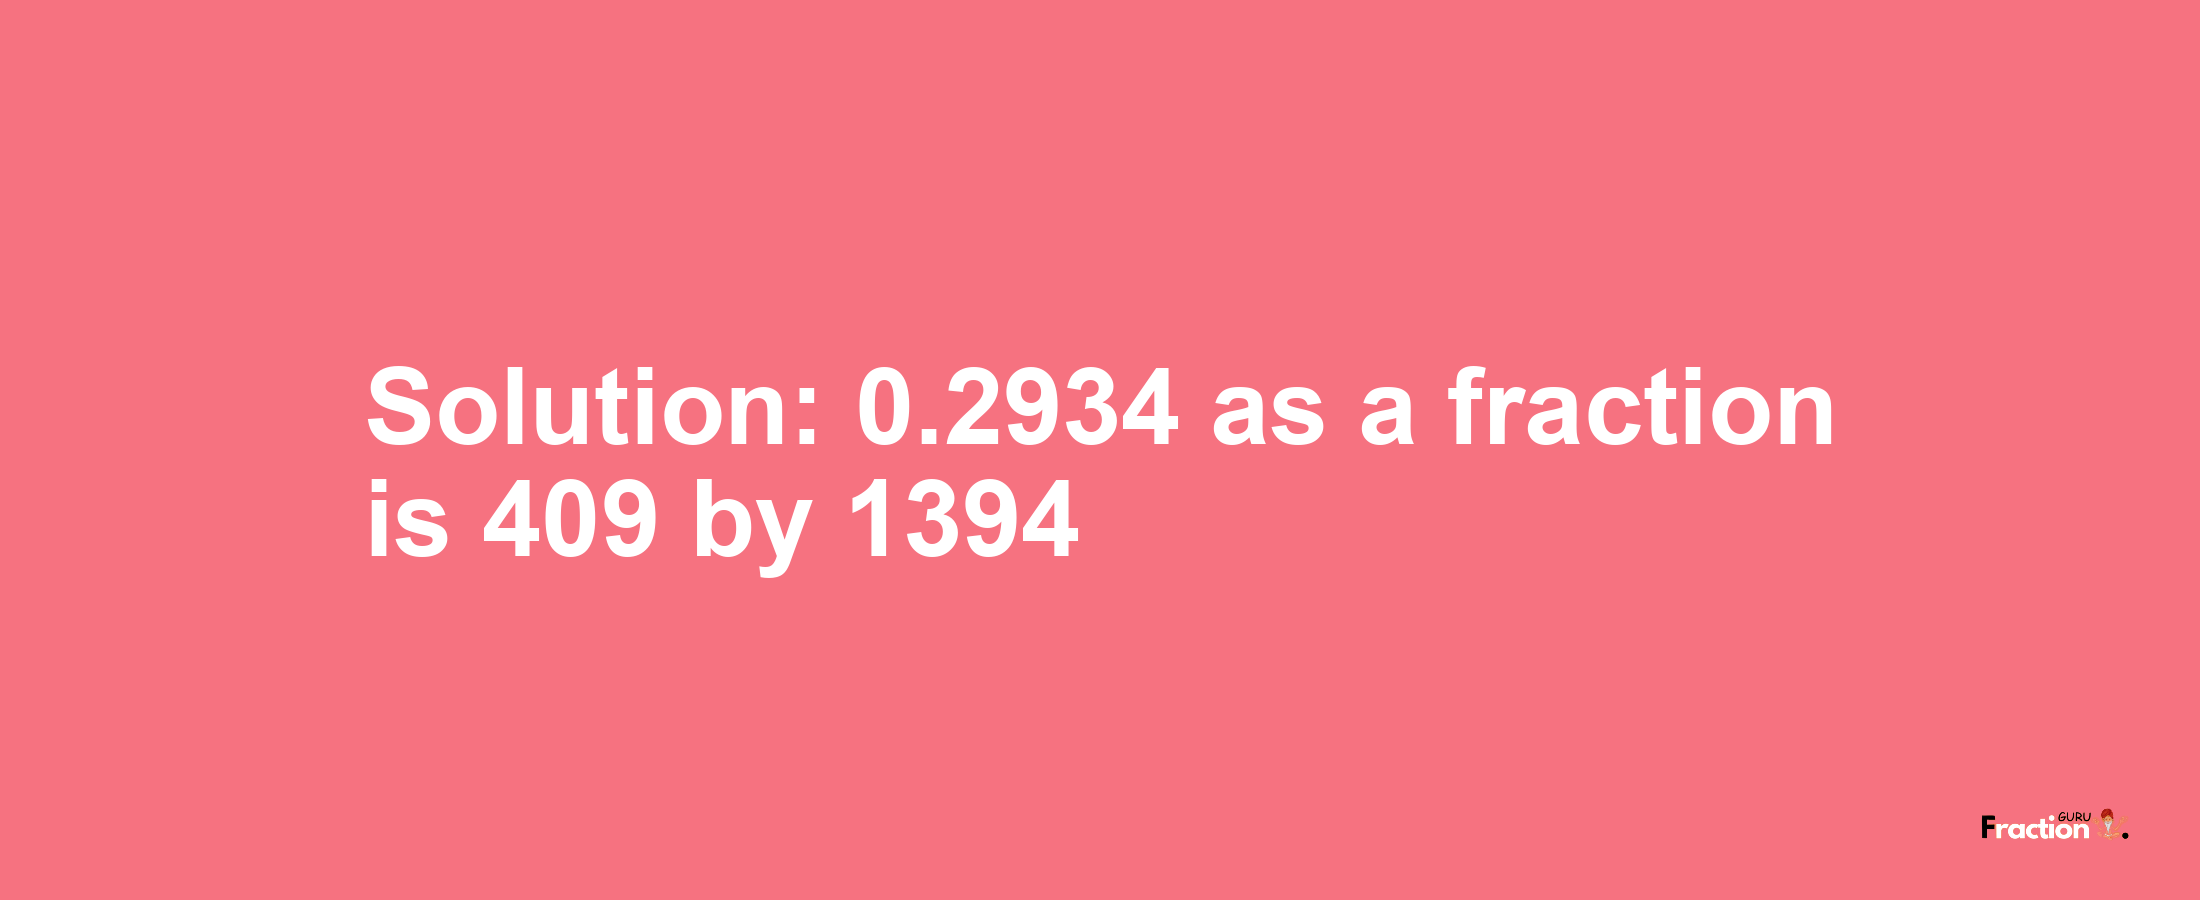 Solution:0.2934 as a fraction is 409/1394